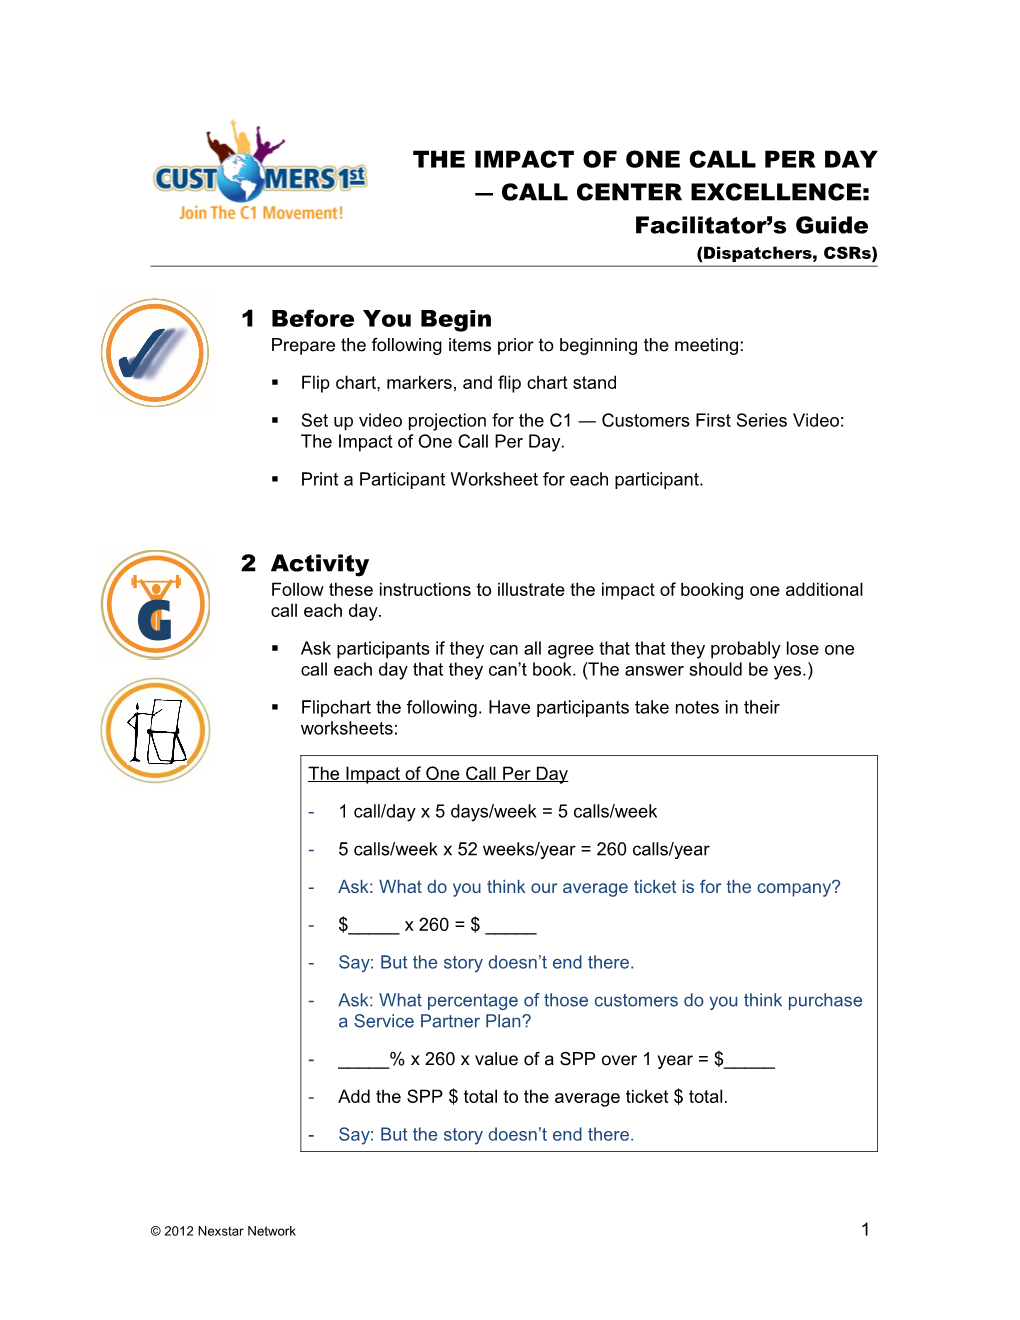 55 Phone Power Impact of One Call Per Day Facilitator Guide